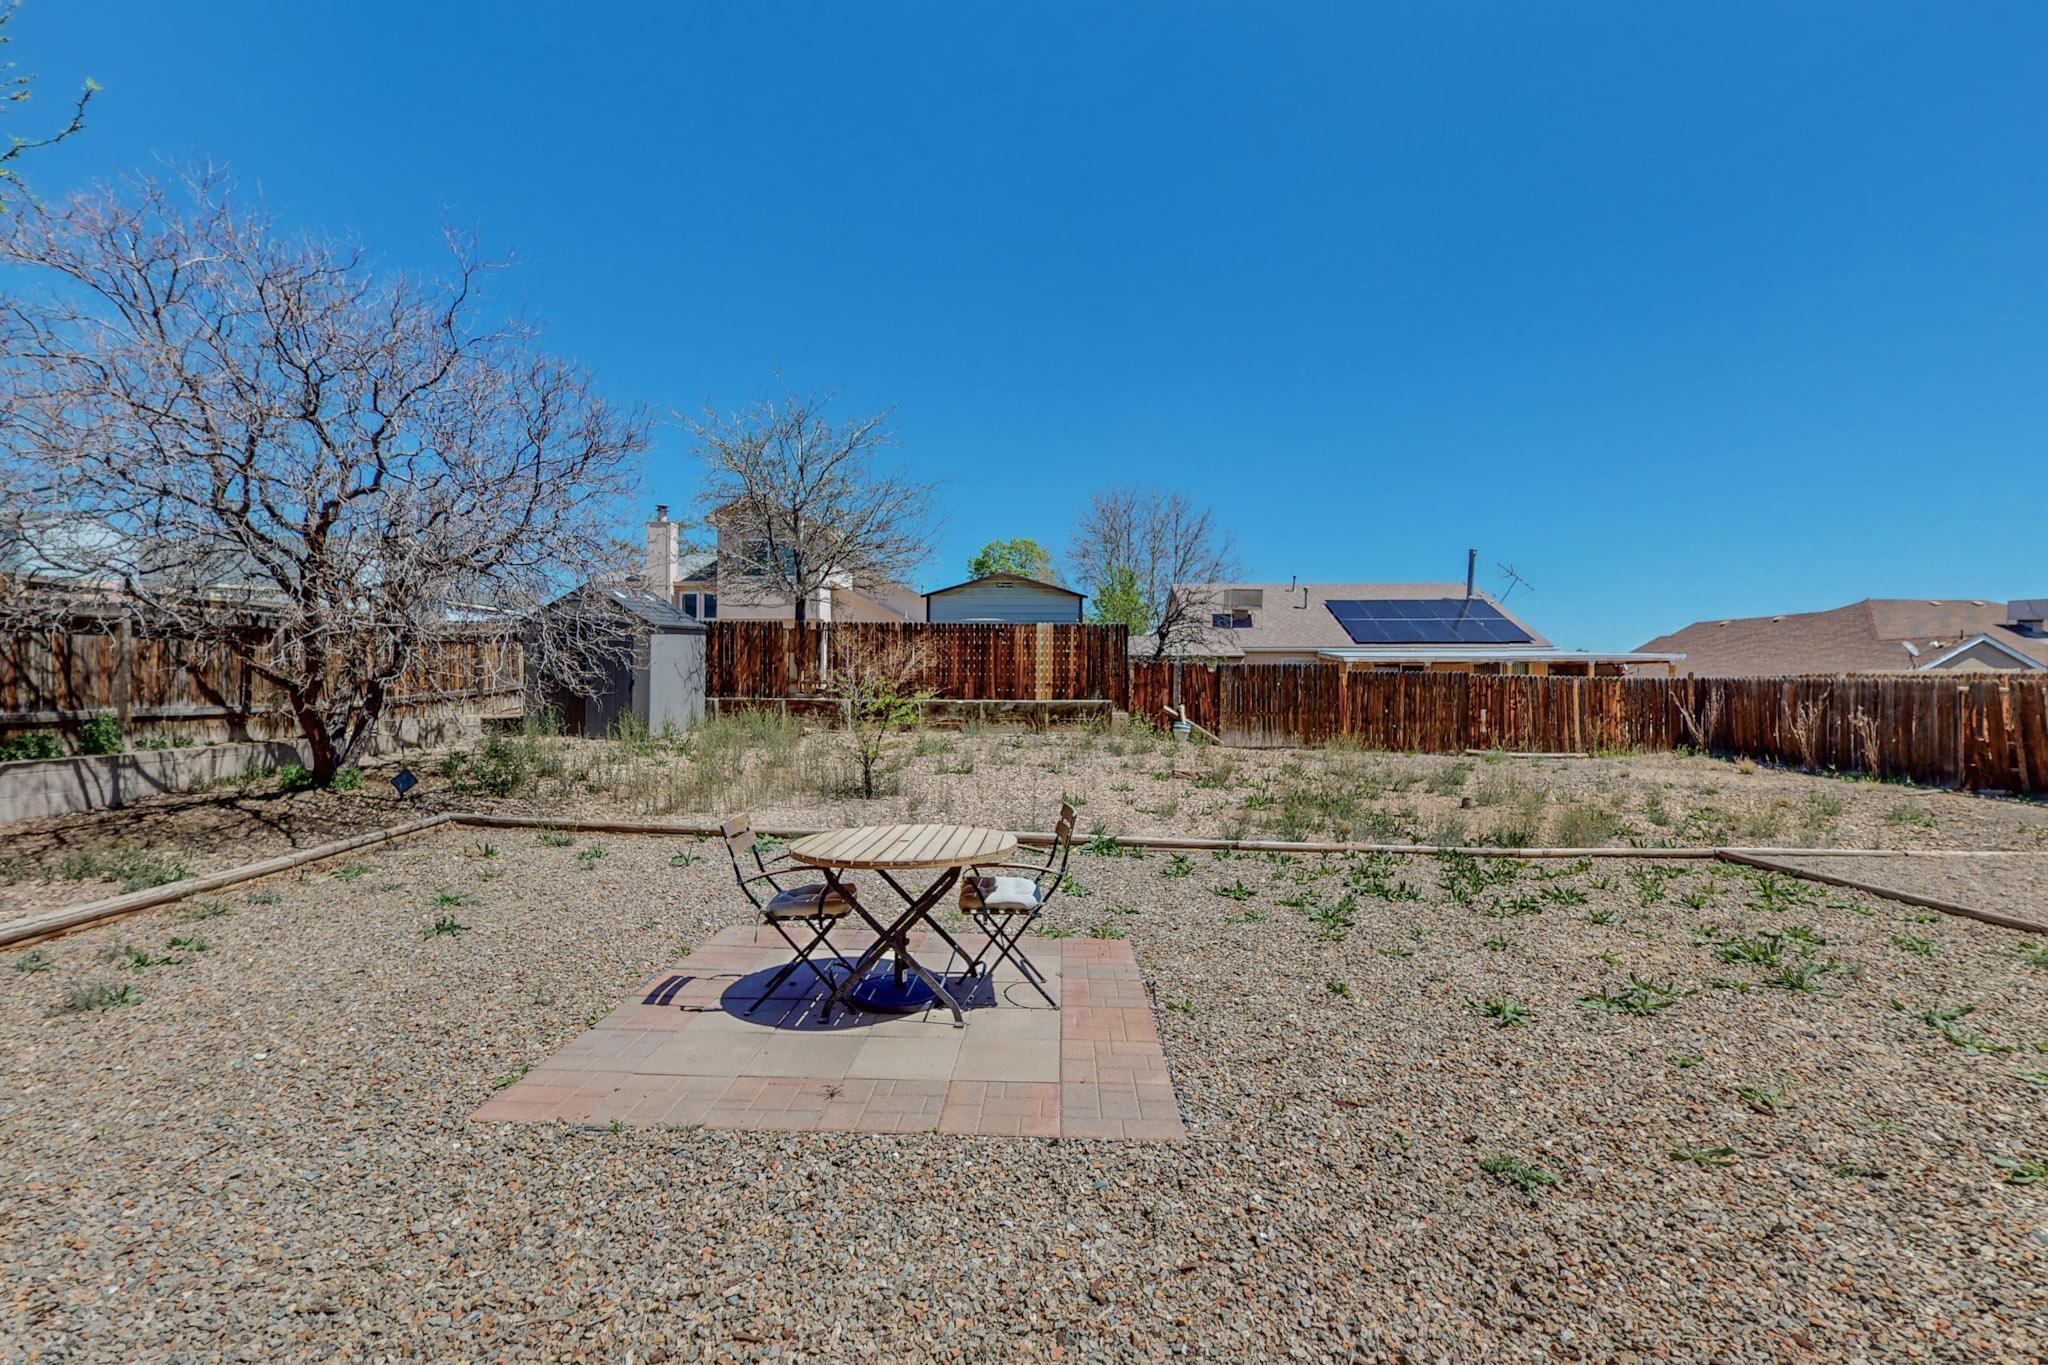 1752 Blueberry Drive NE, Rio Rancho, New Mexico 87144, 3 Bedrooms Bedrooms, ,3 BathroomsBathrooms,Residential,For Sale,1752 Blueberry Drive NE,1060963